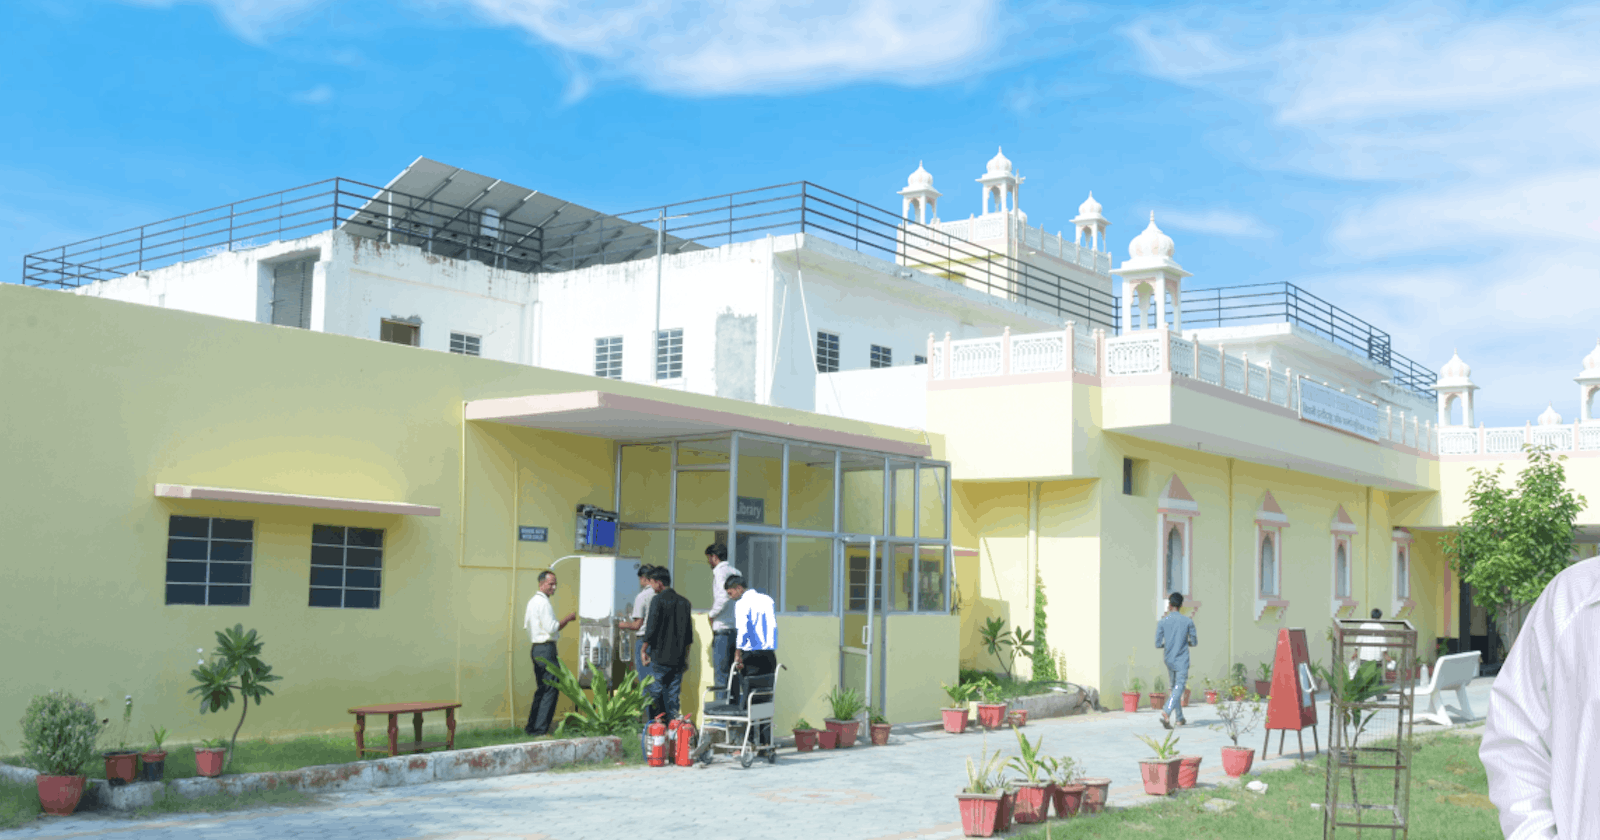 Innovative Learning at Biyani Pharmacy College: The Top Pharmacy College in Jaipur